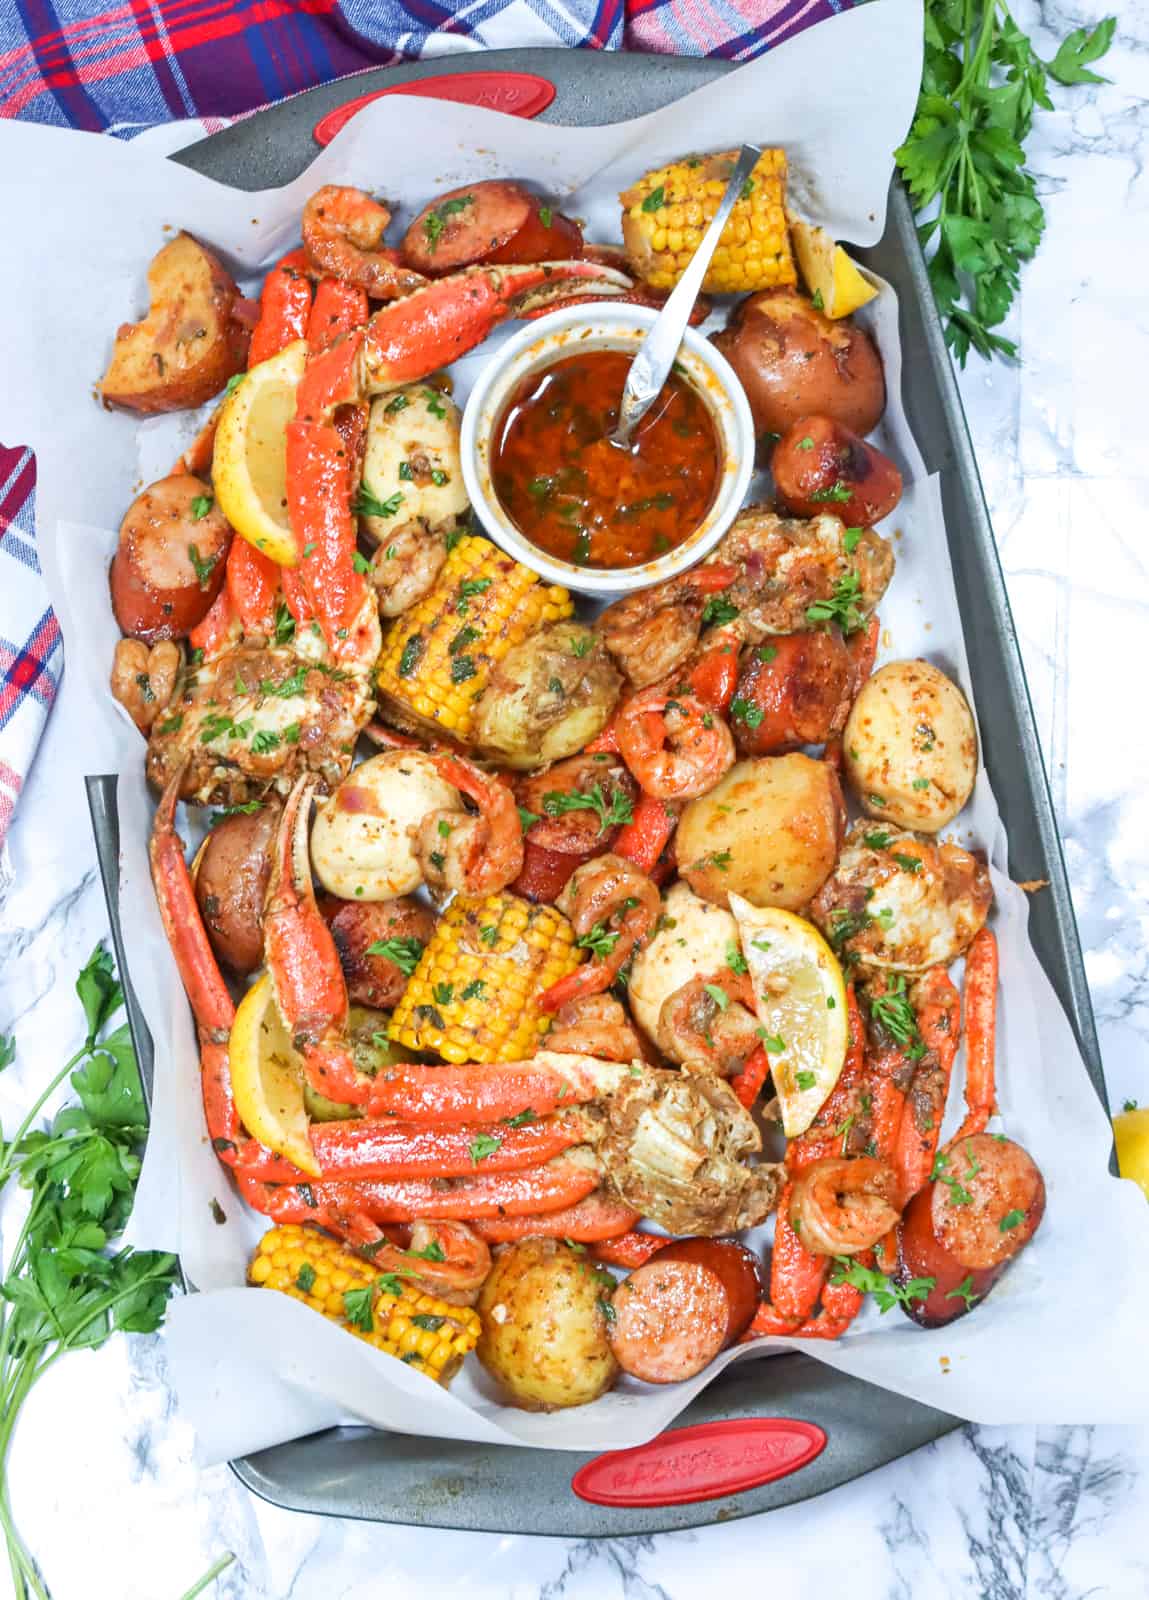 Serving up delicious Seafood Boil in a Bag with hot sauce